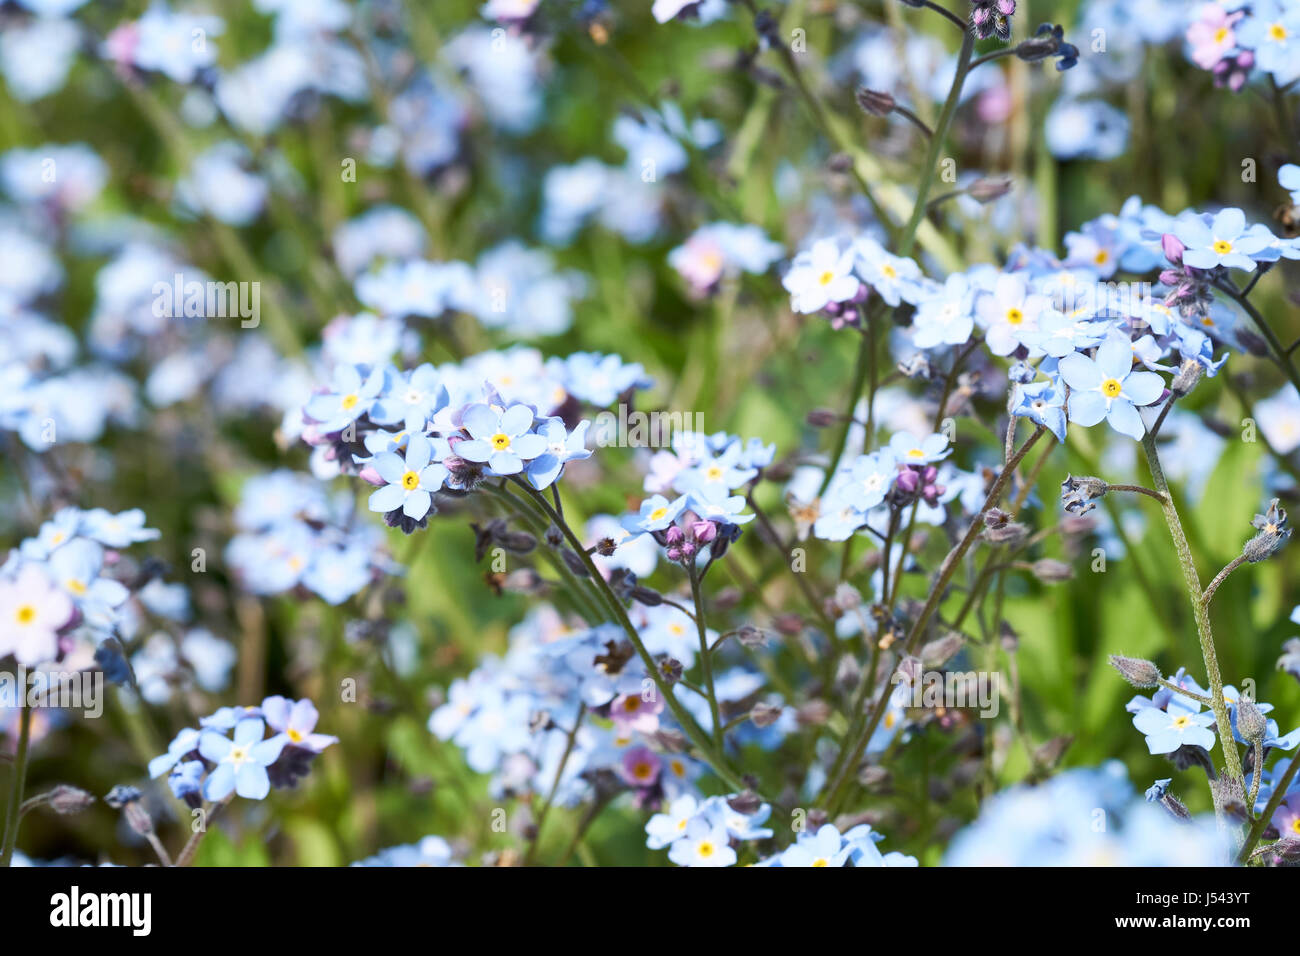 Blue flowered water forget-me-not (Myosotis scorpioides) plants growing in a English country garden flowerbed, UK. Stock Photo